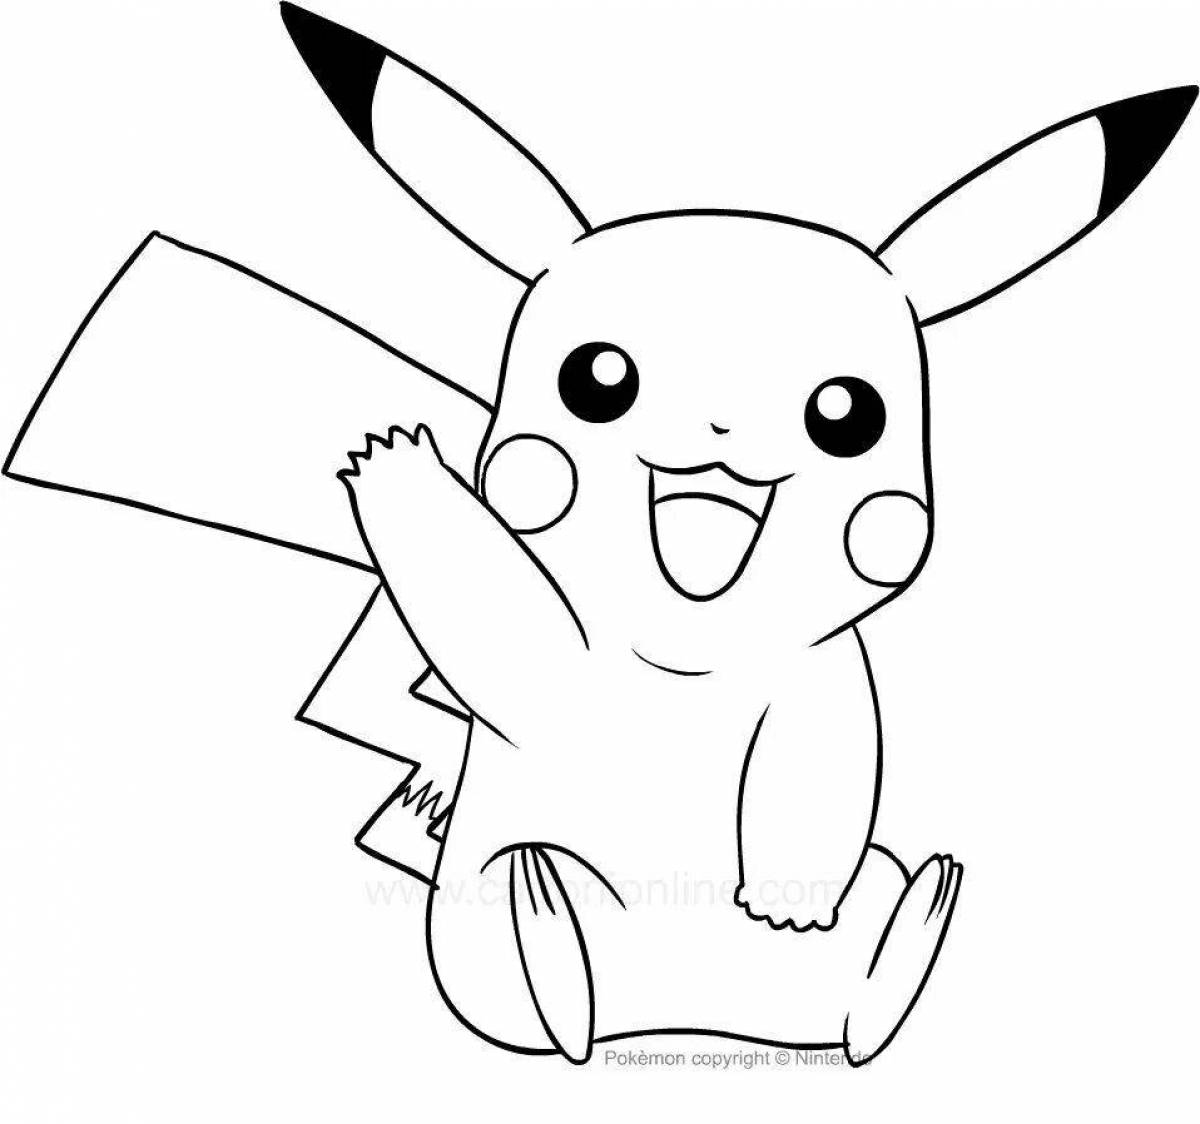 Funny pikachu figurine coloring page